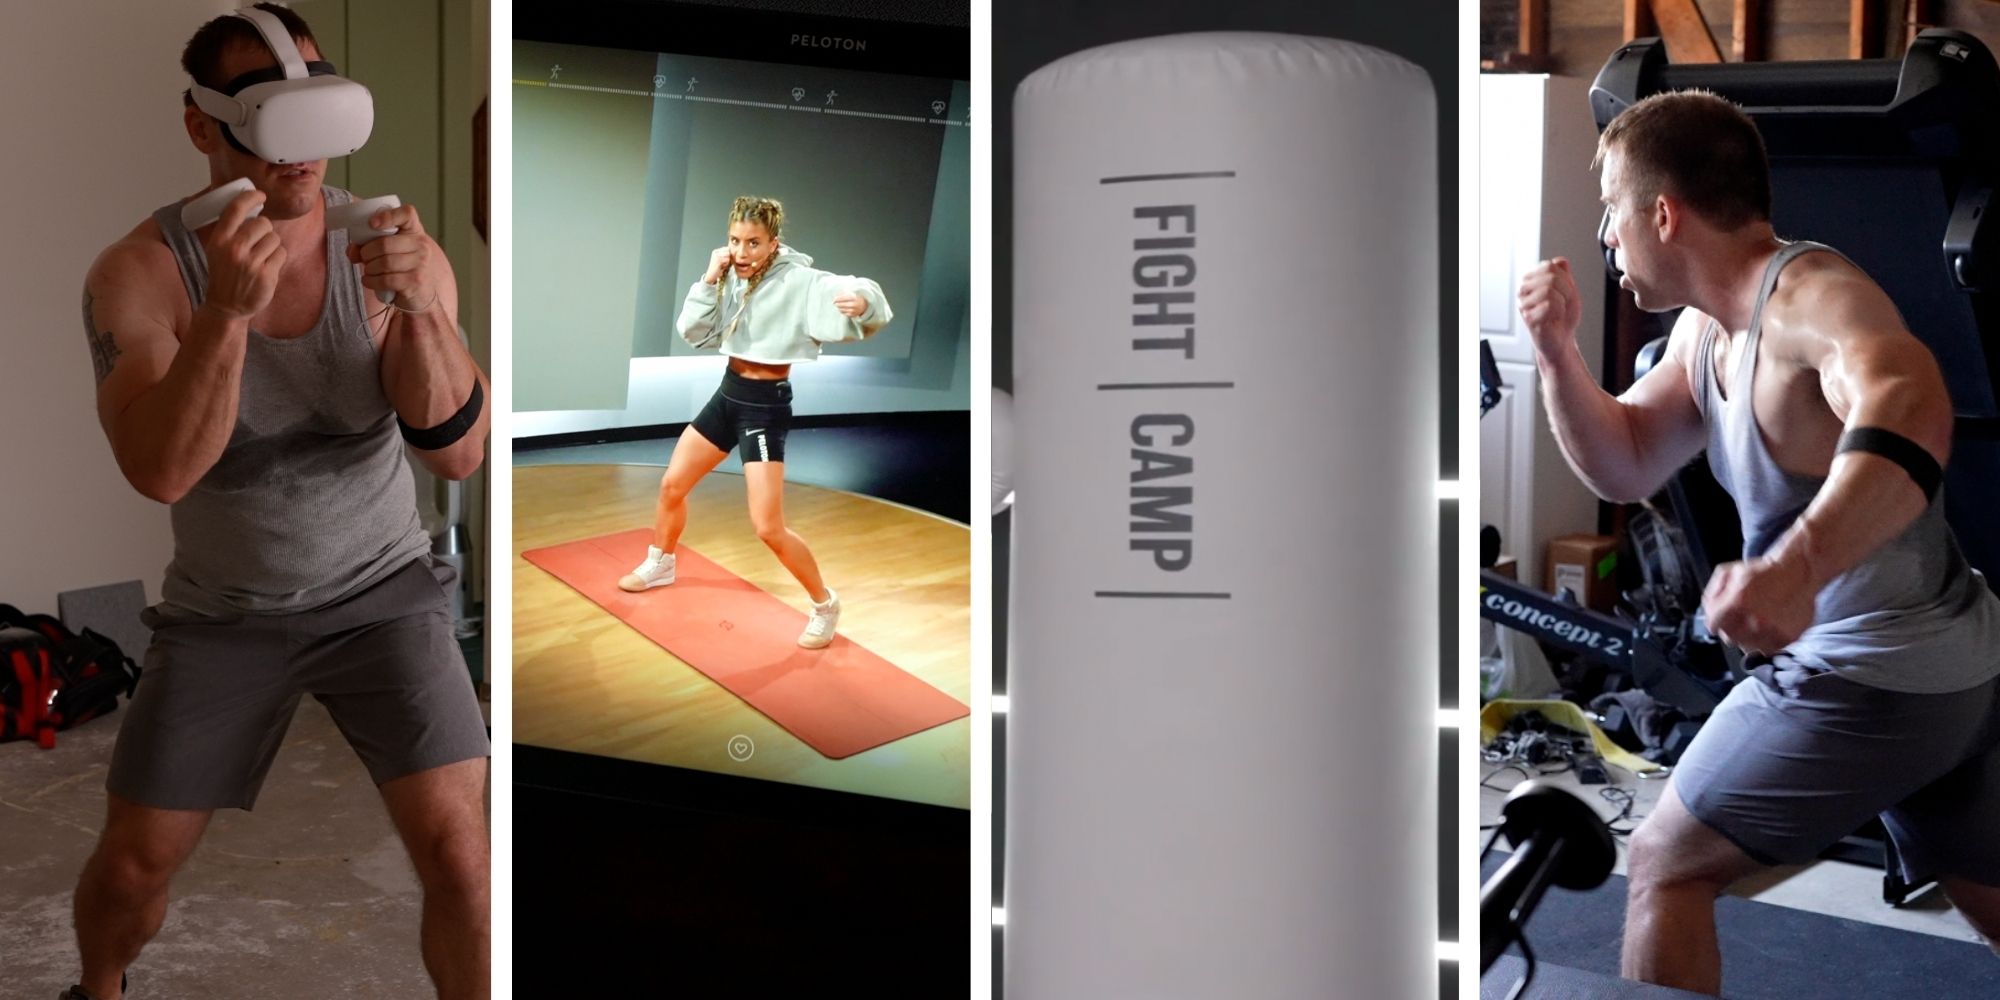 Best home boxing workouts from Peloton to FightCamp!